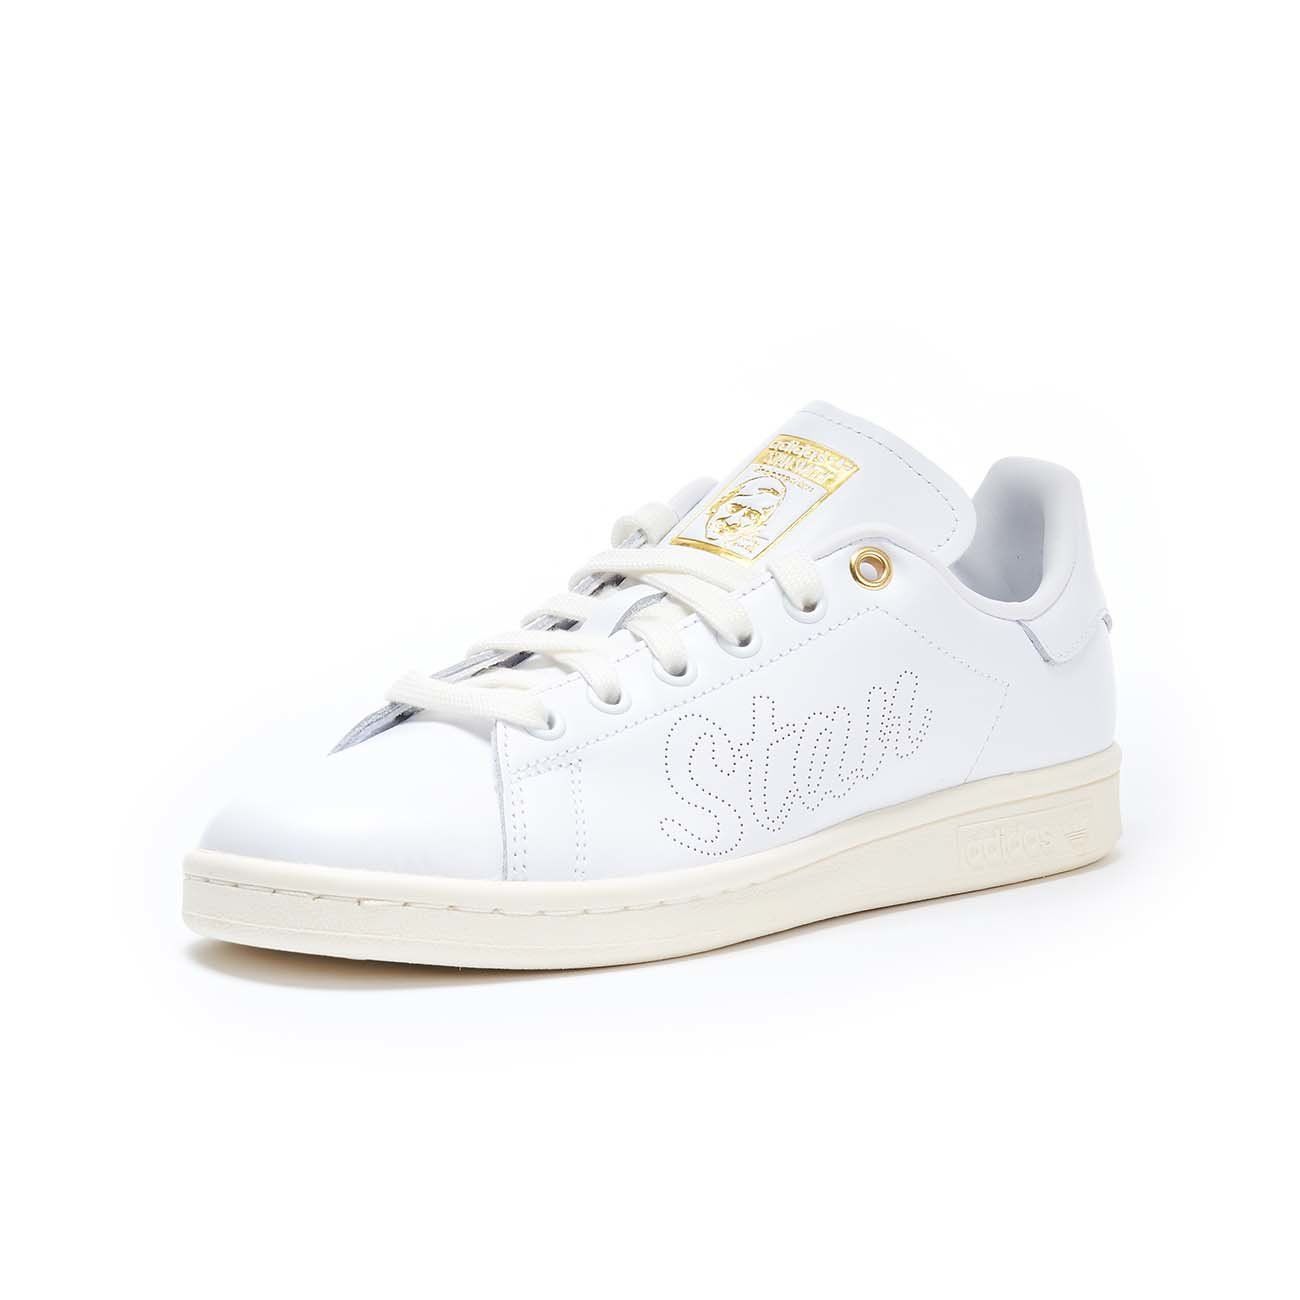 Adidas Originals Stan Smith Sneakers in Off White